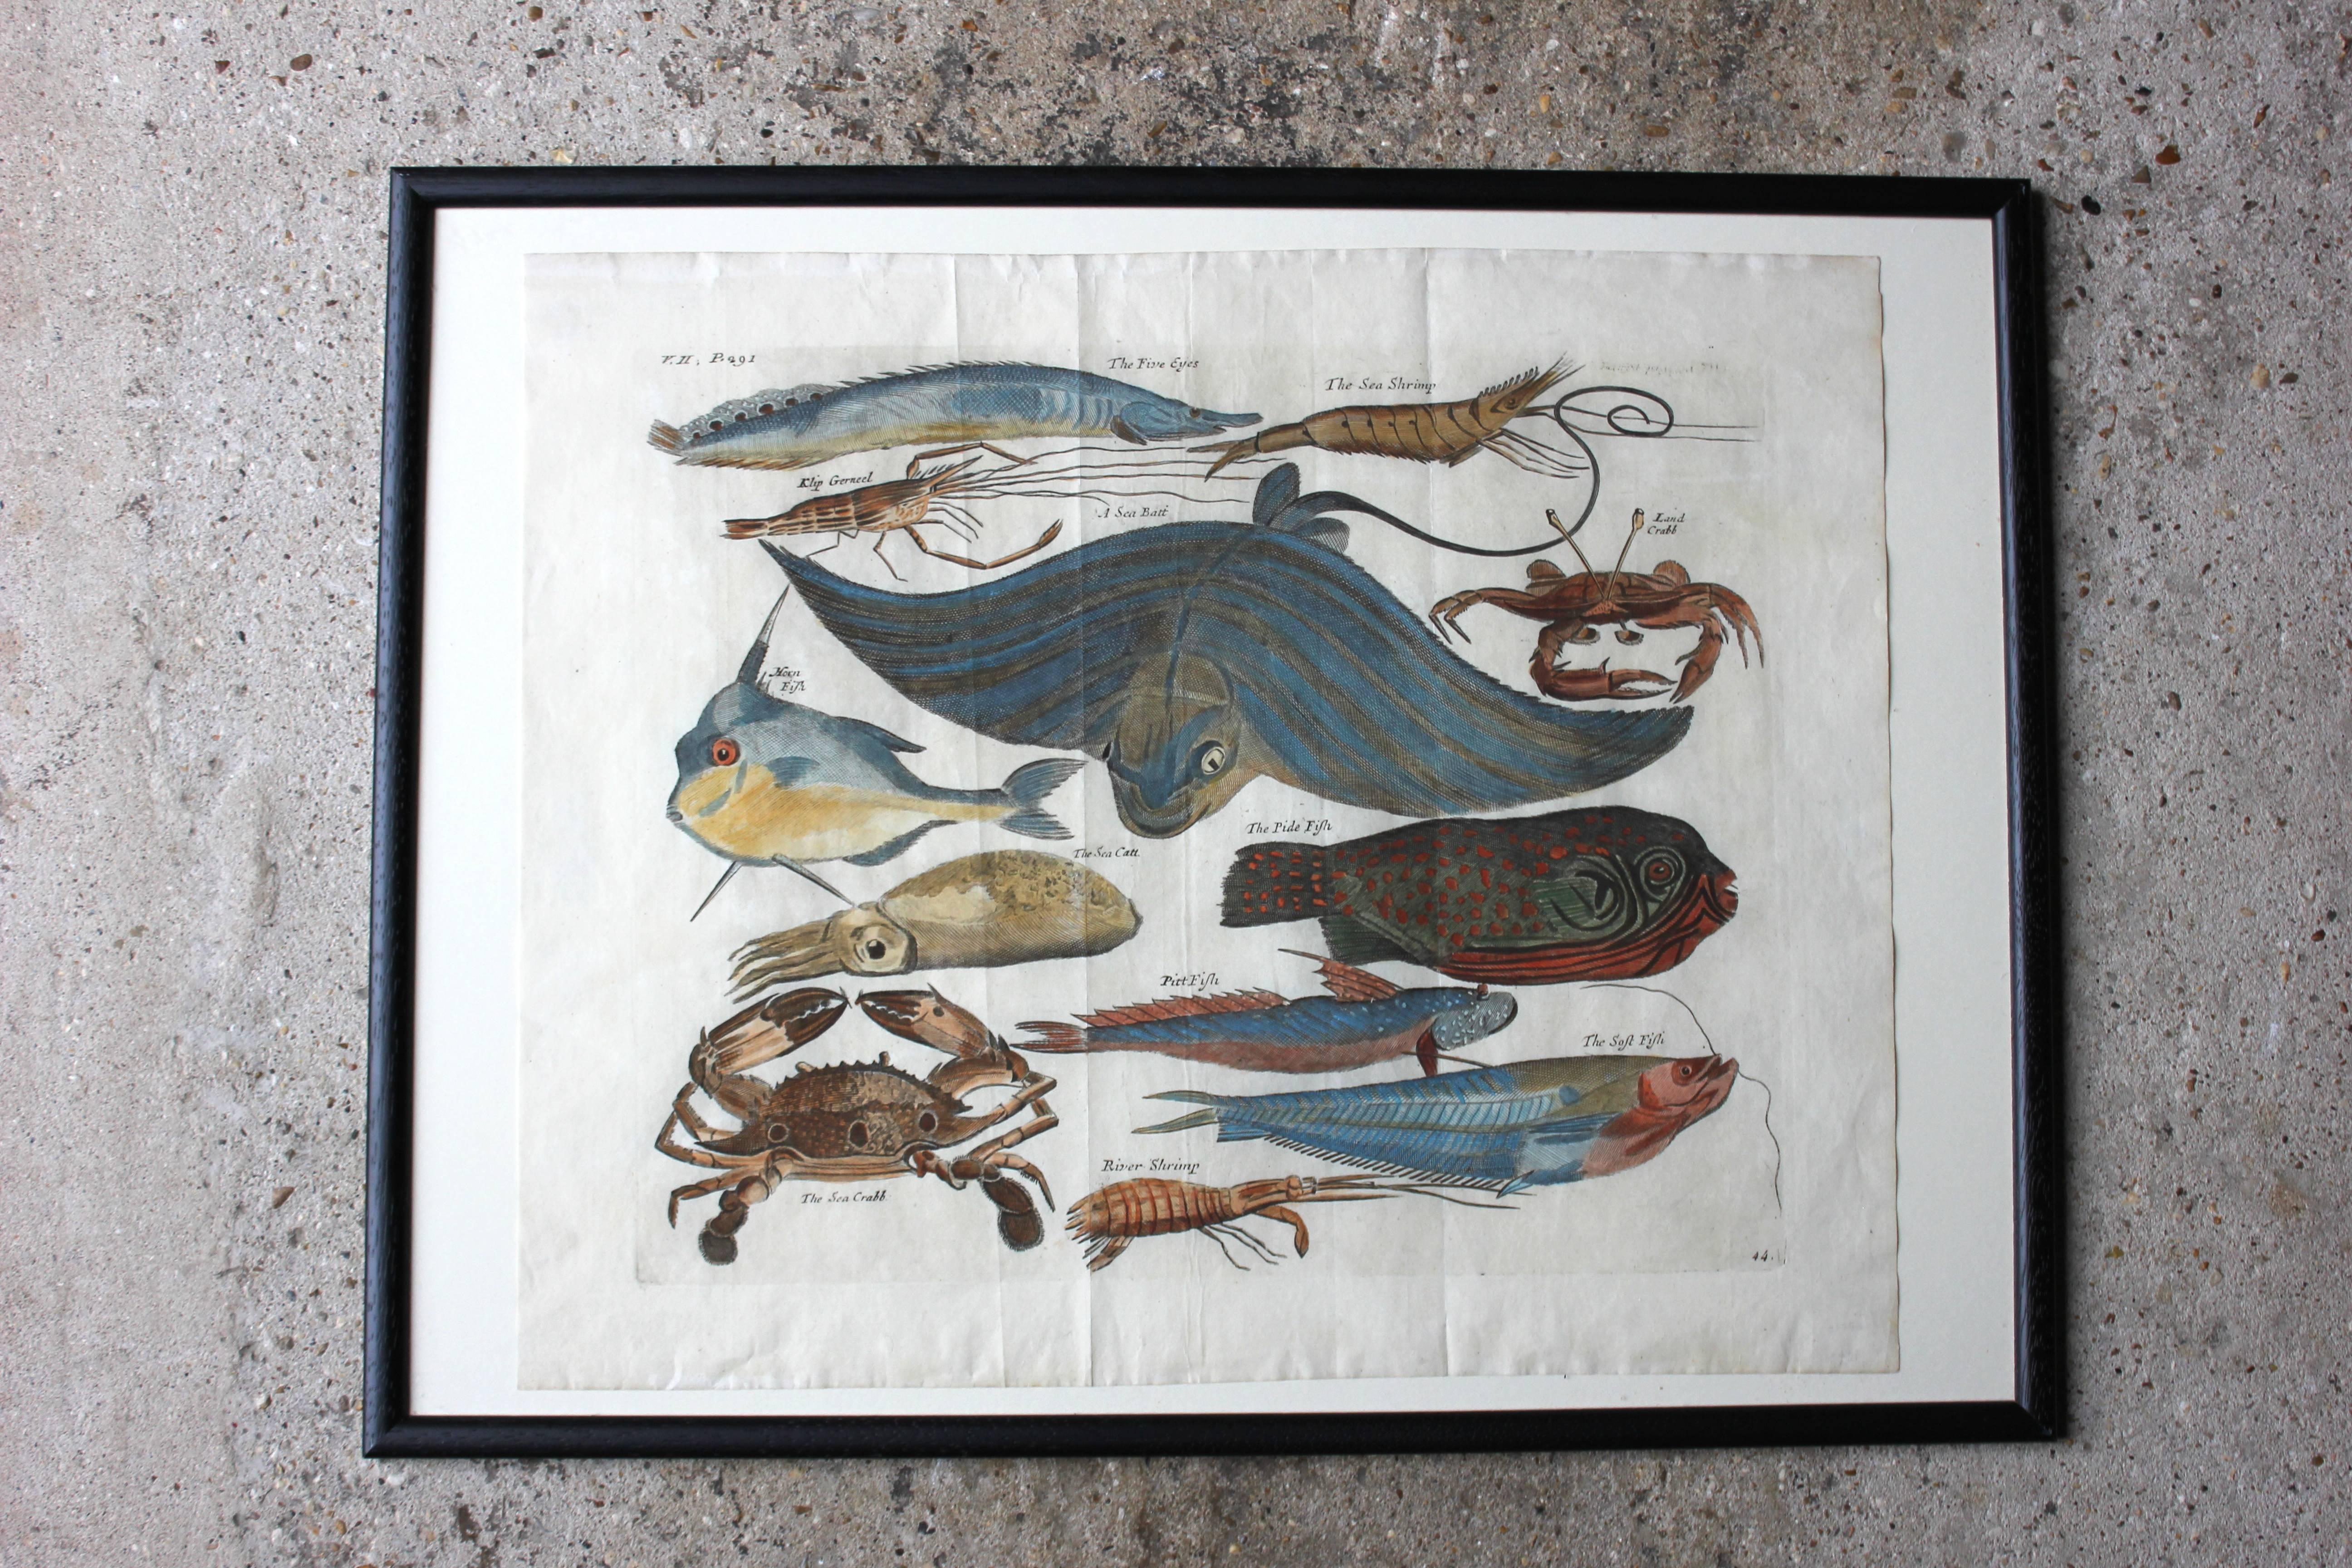 Paper Hand-Colored Copper Plates of Fish from “a Collection of Voyages and Travels